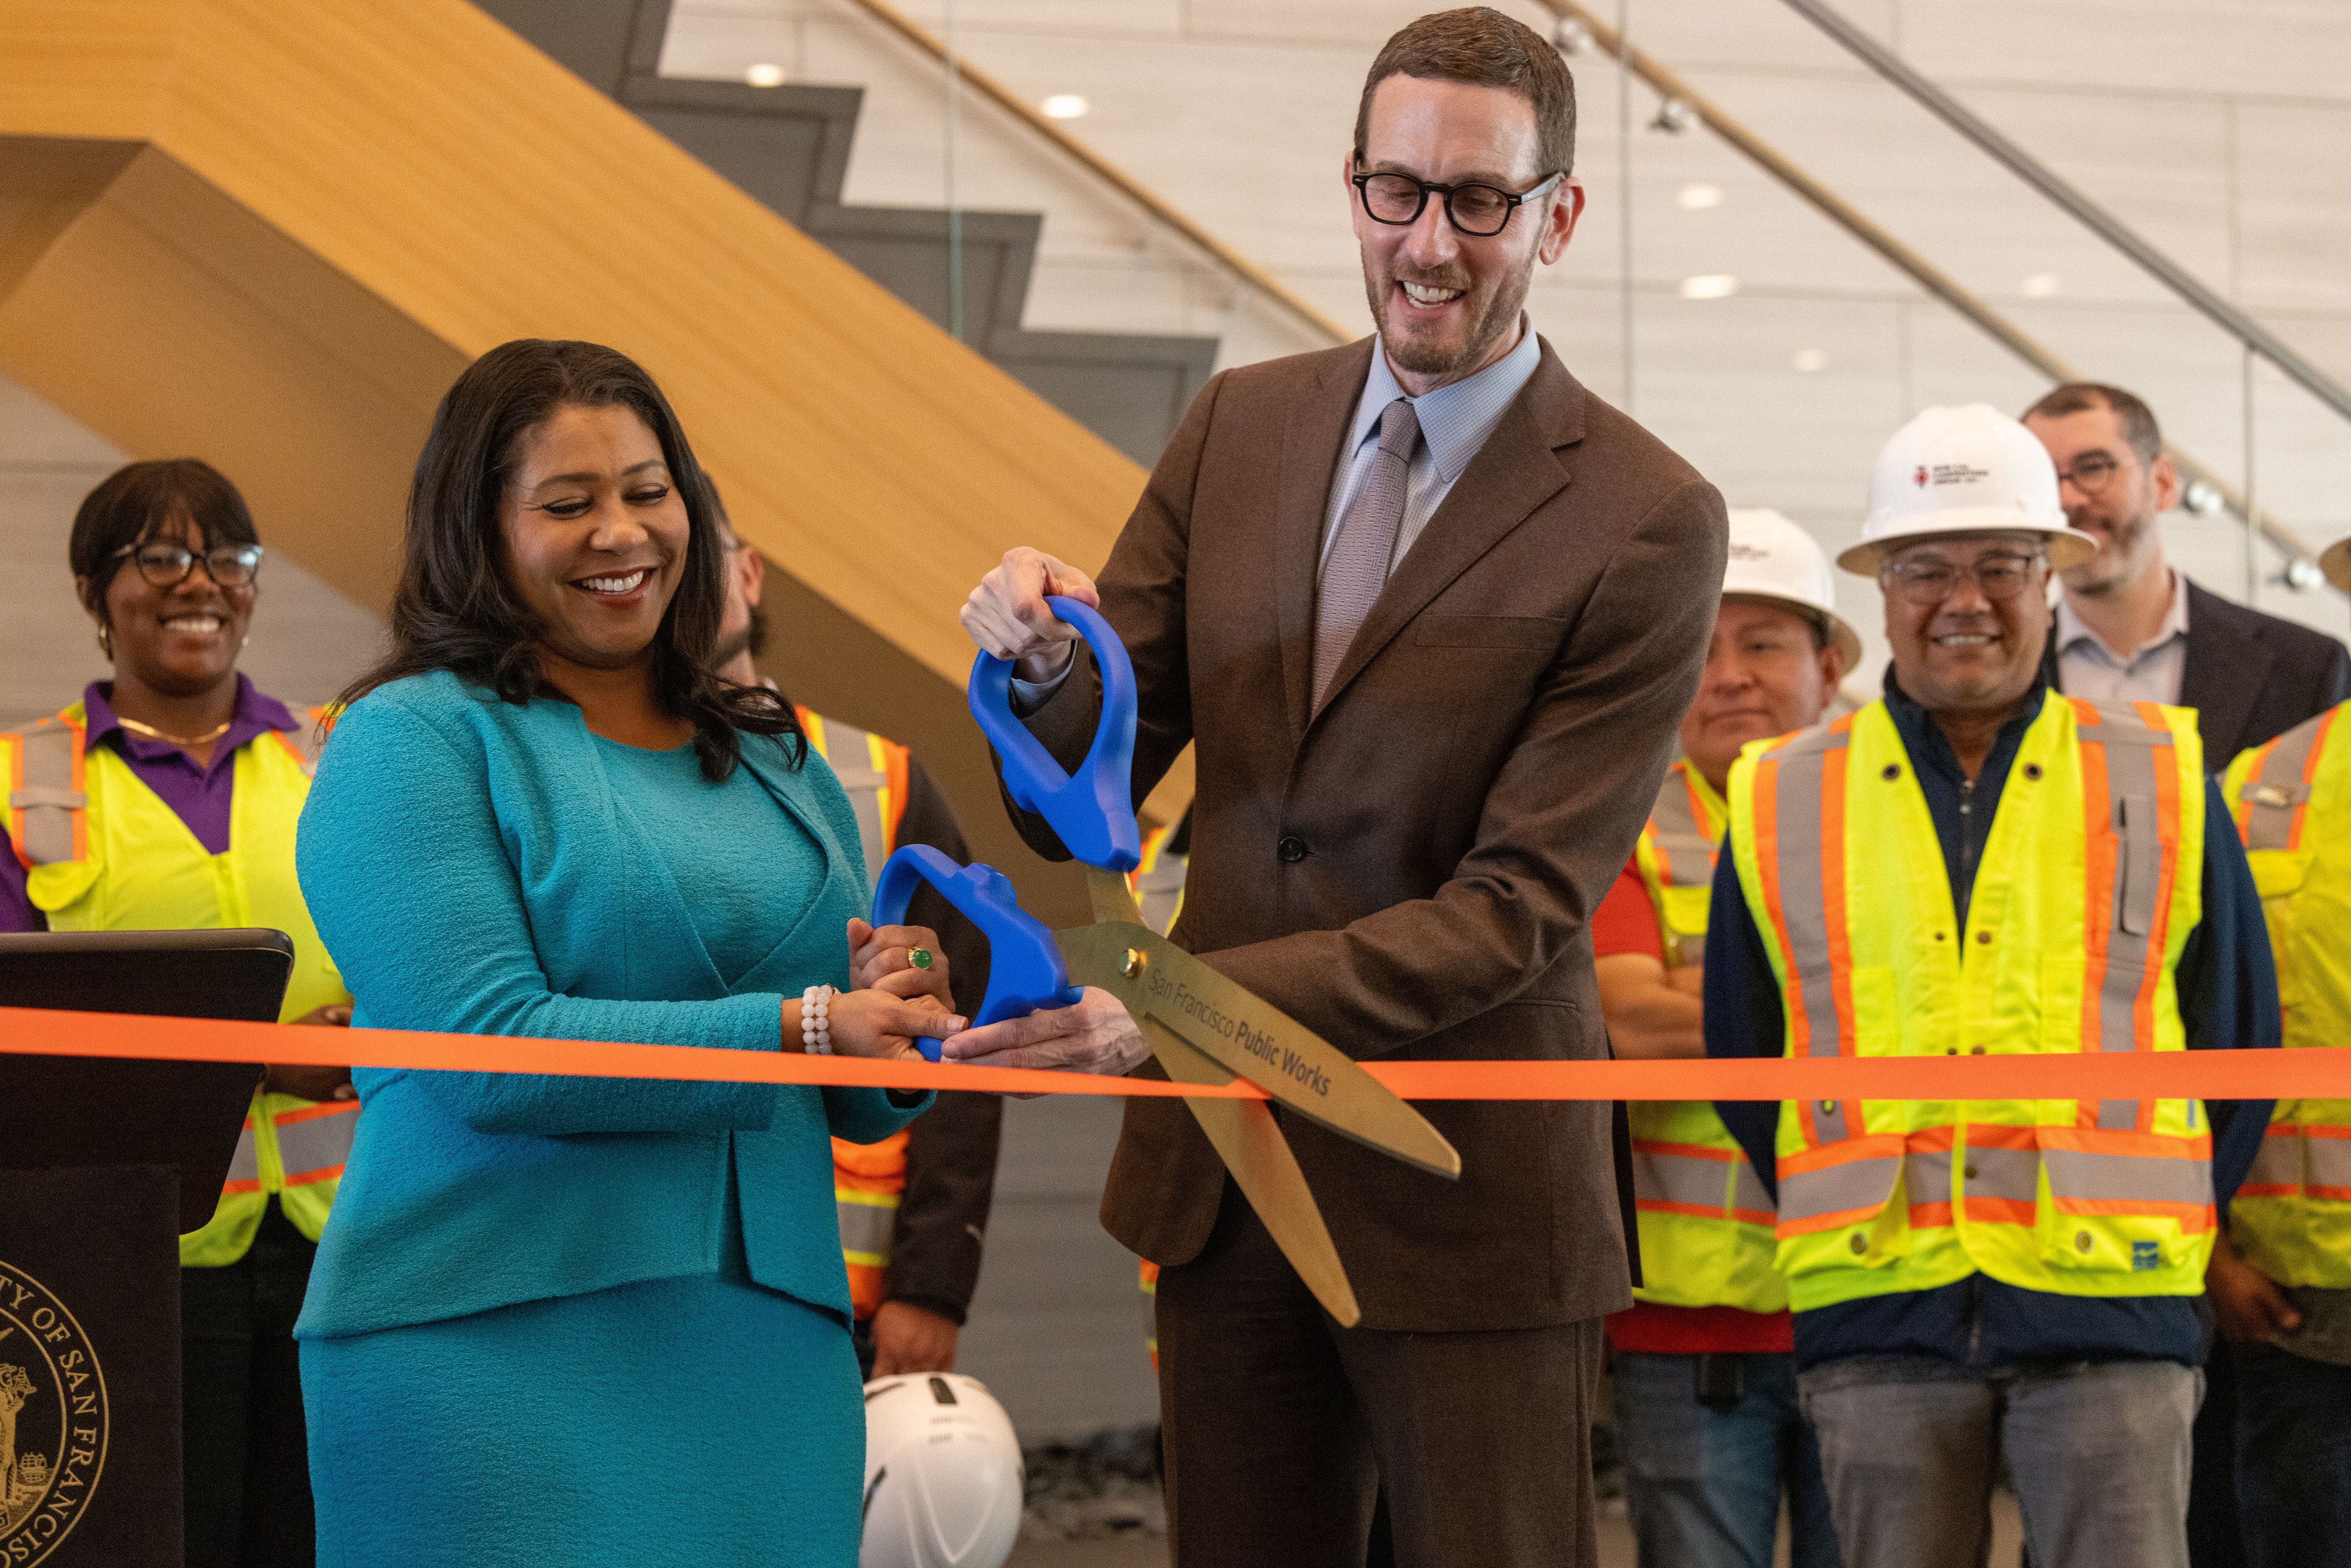 Two people in formal attire are smiling while cutting a red ribbon with oversized blue scissors, surrounded by construction workers wearing yellow vests and helmets.